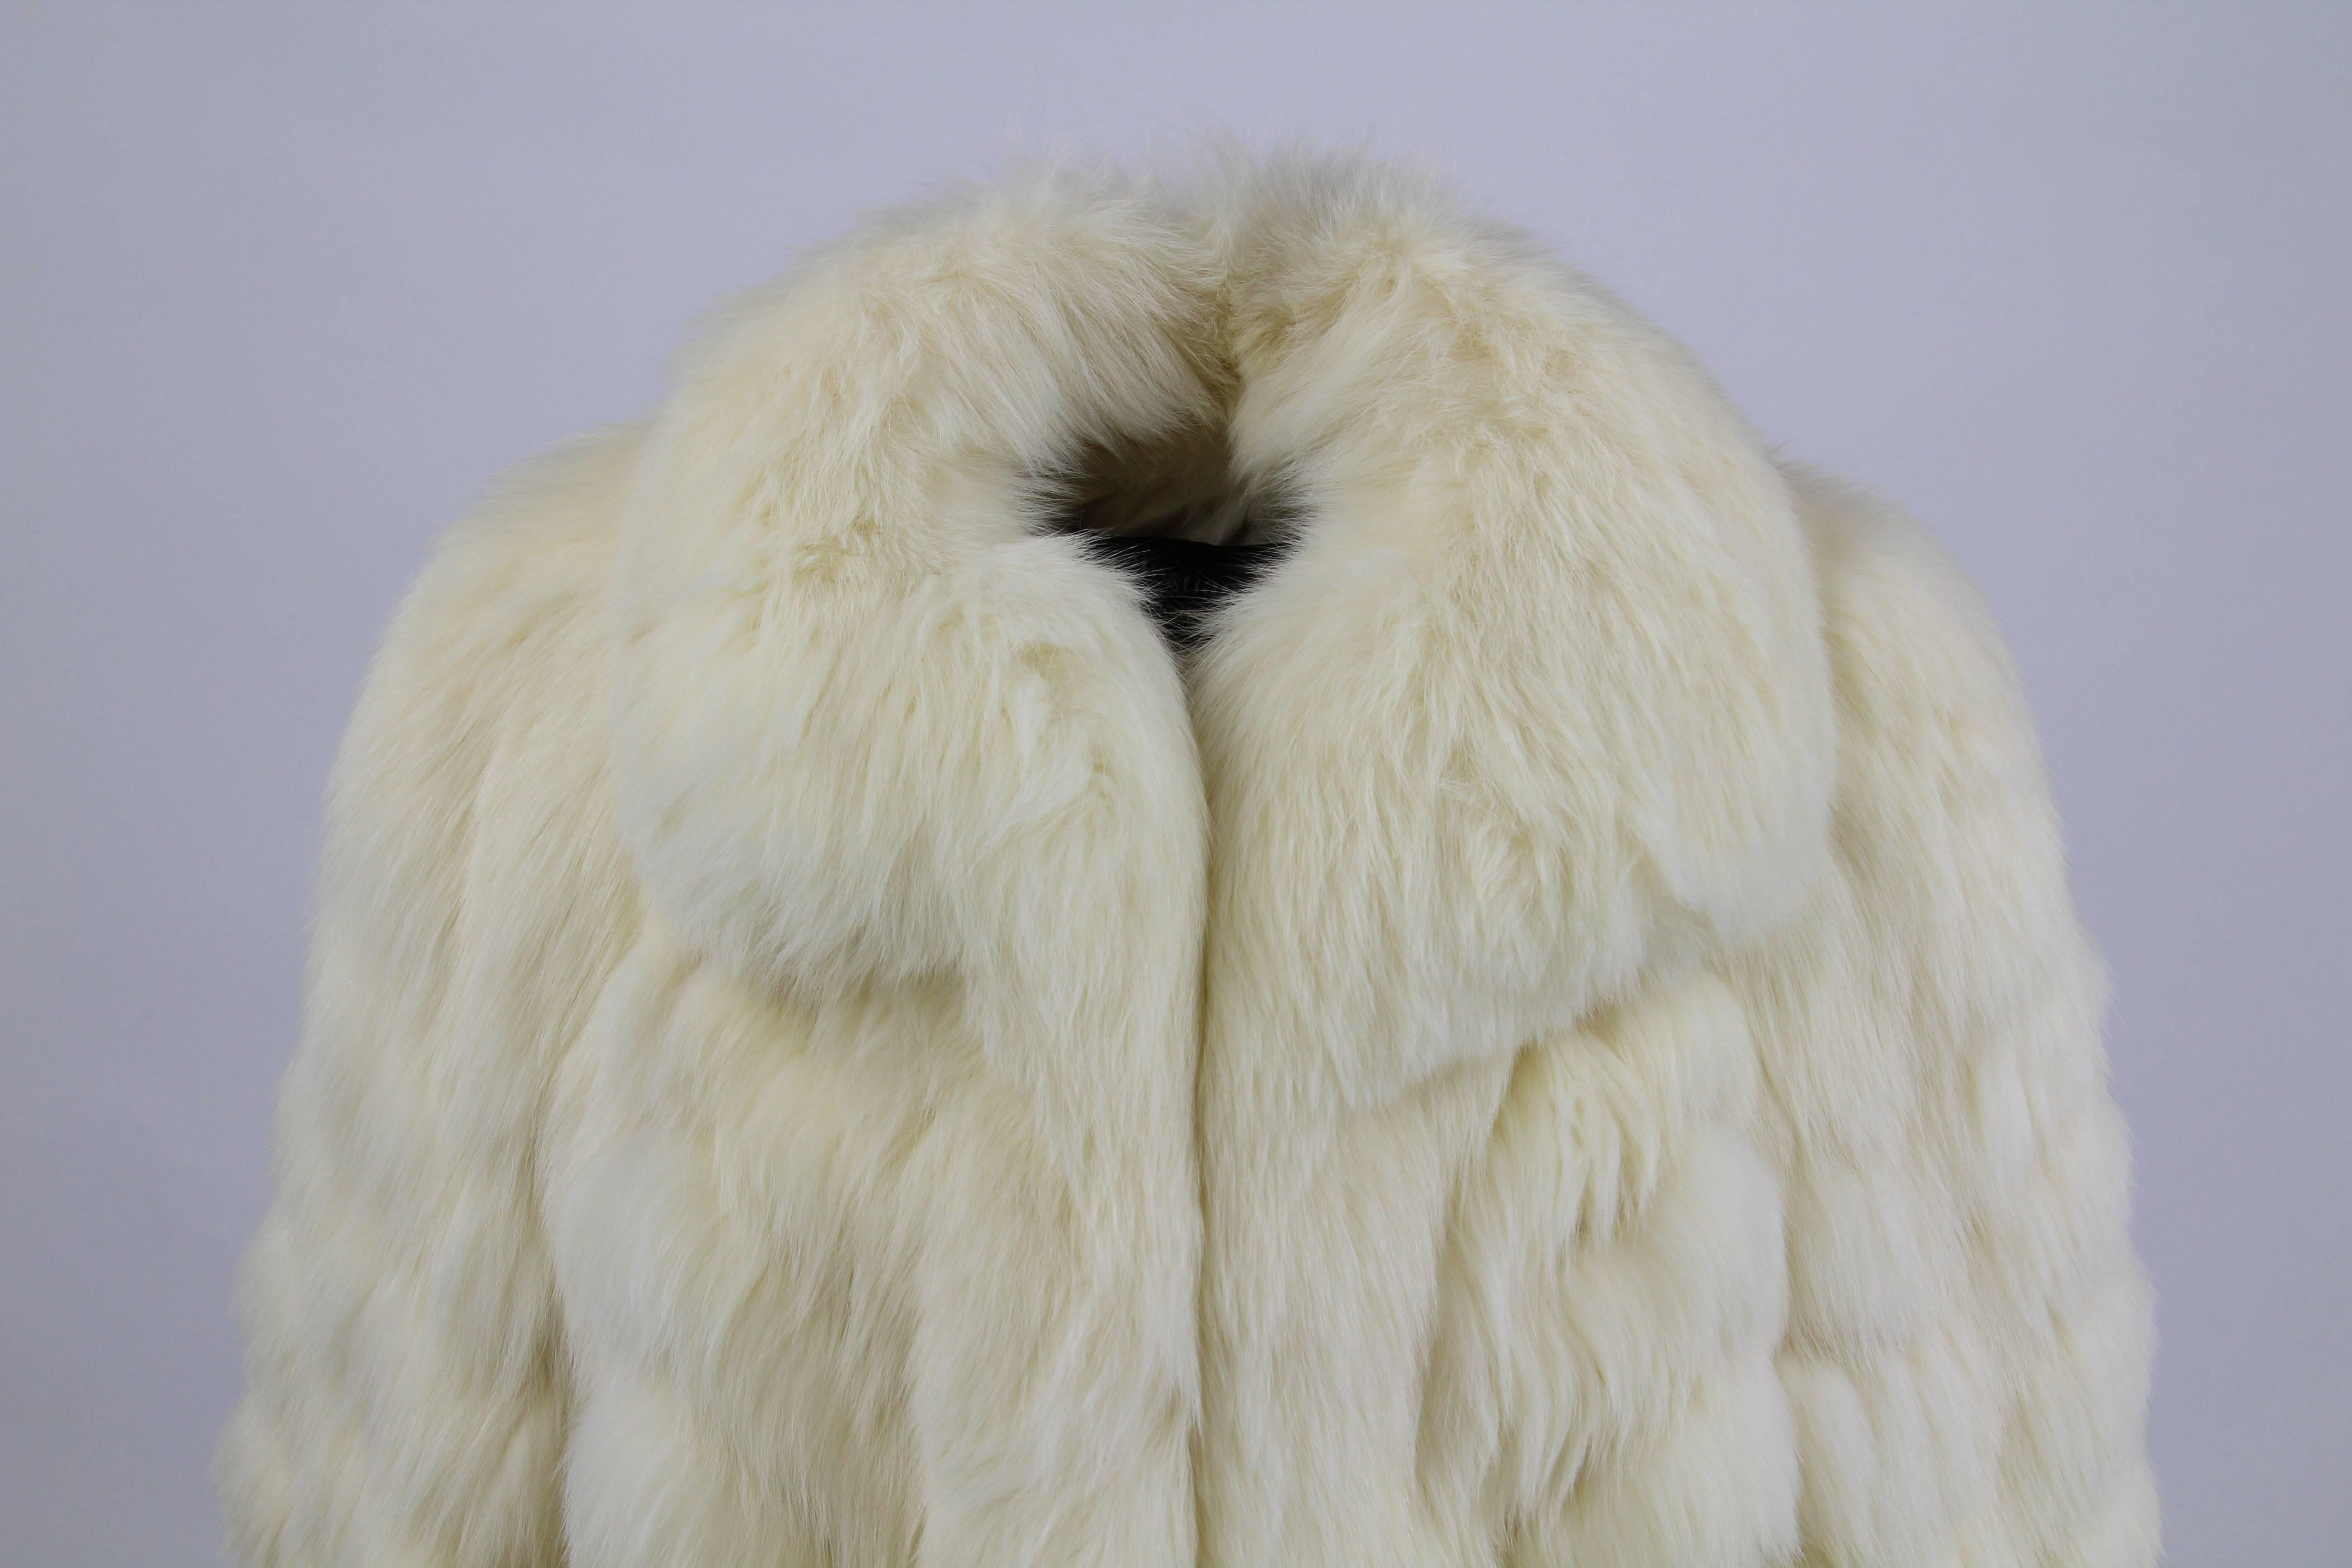 Late 1980s iconic white Christian Dior fur jacket featuring a sporty style and raglan-cut sleeves. 

Polar fox fur ("vulupus lagopus") of a premium artisanal quality.
The jacket was designed by Gianfranco Ferré.
Measurements: front 94